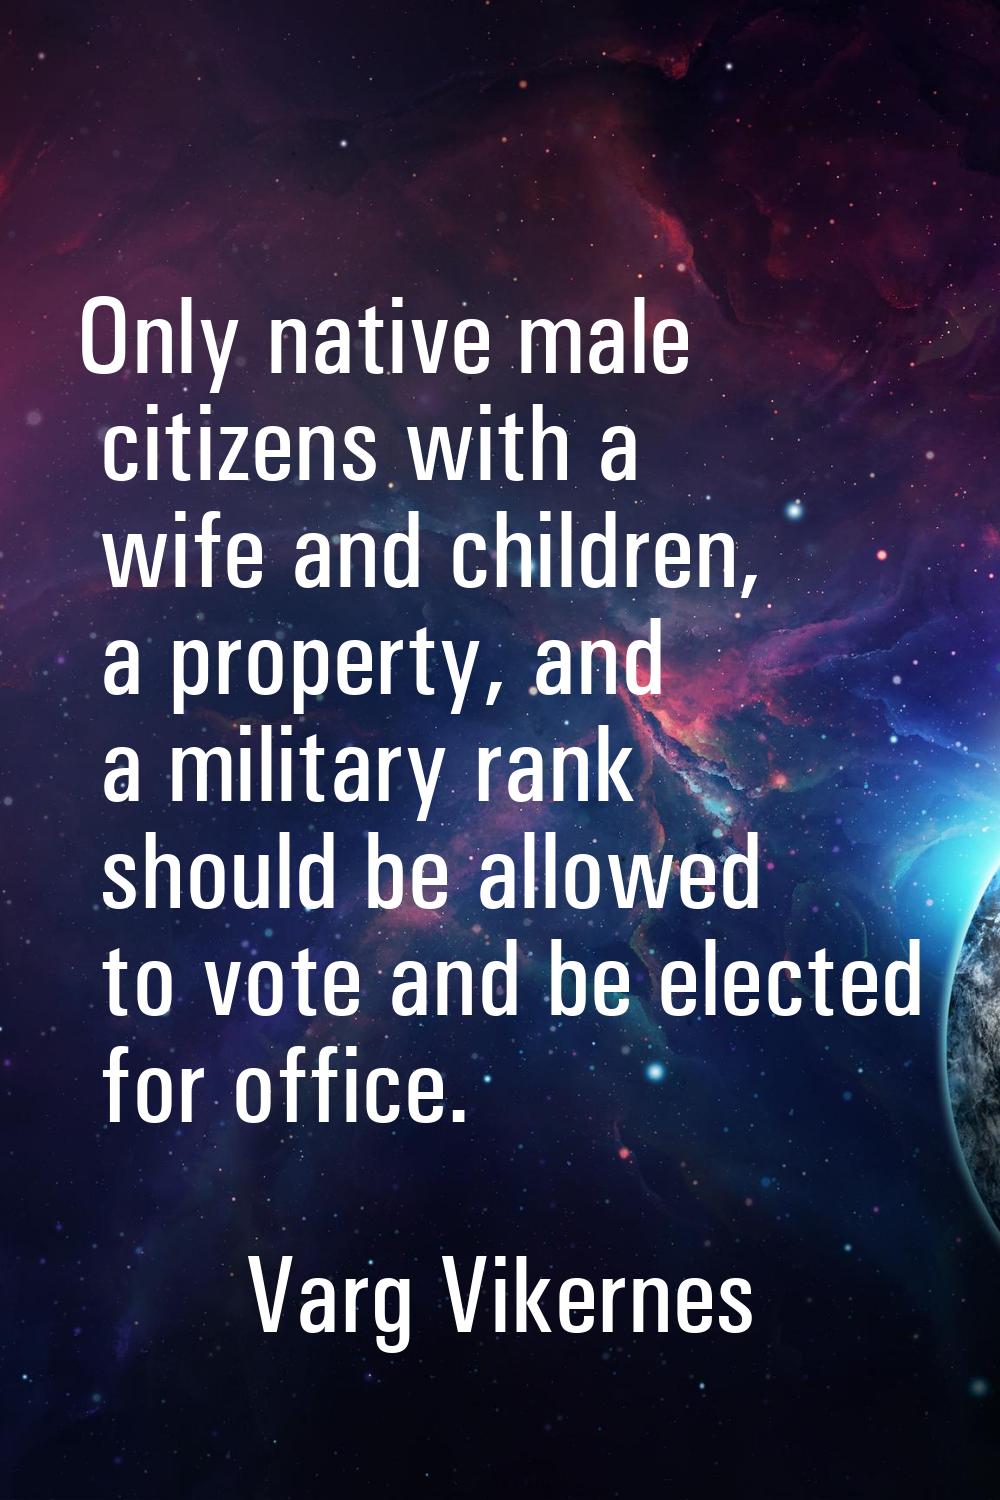 Only native male citizens with a wife and children, a property, and a military rank should be allow